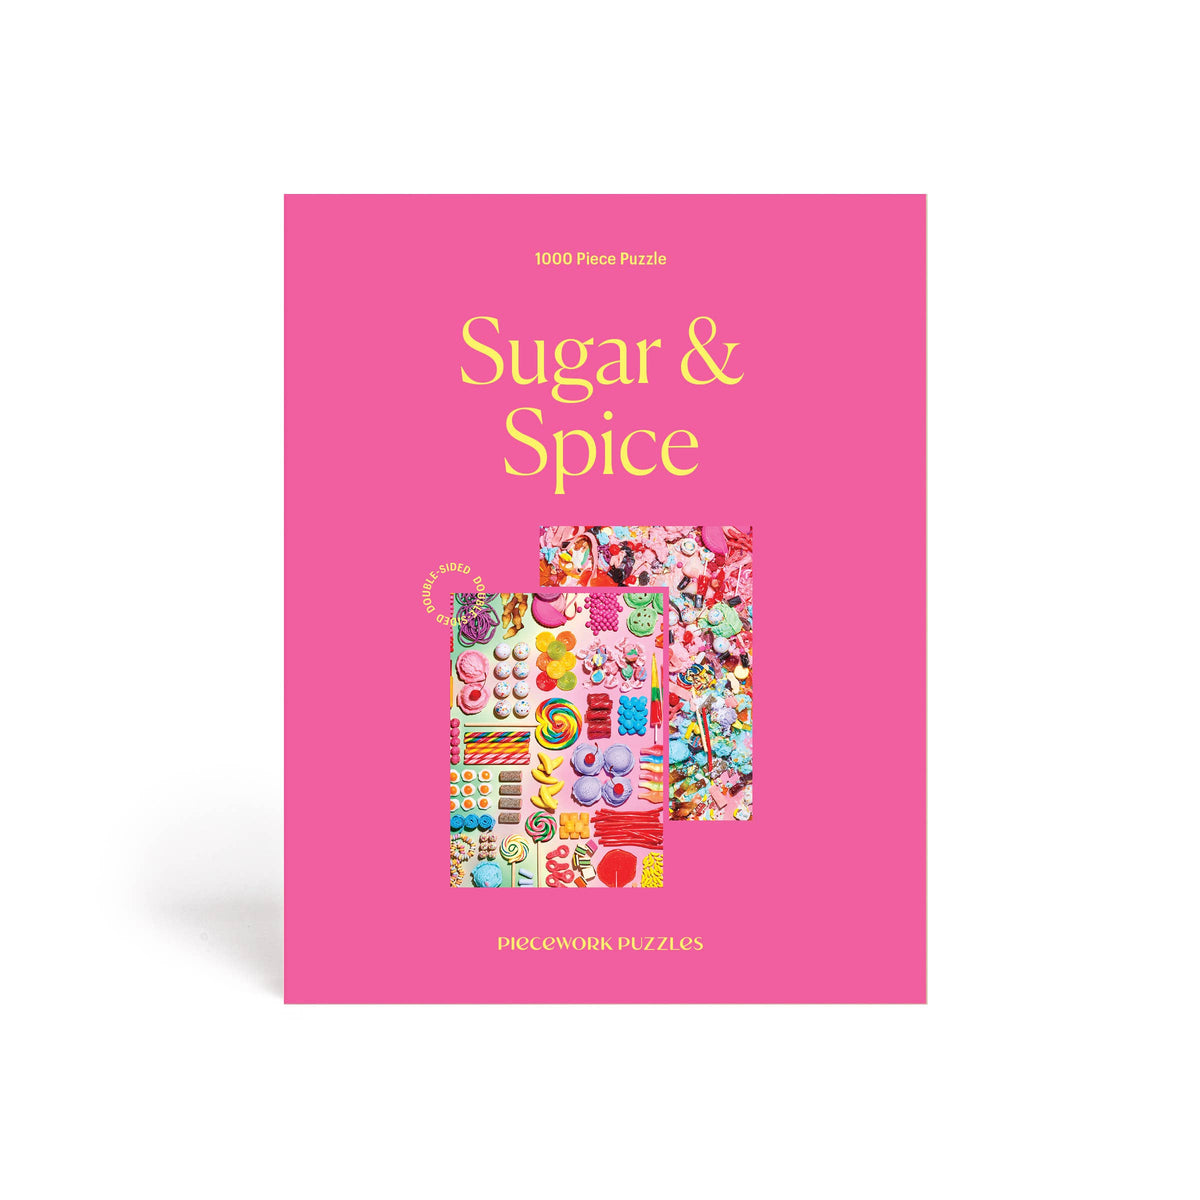 ✨ NEW ✨Sugar & Spice - Double Sided 1000 Piece Puzzle